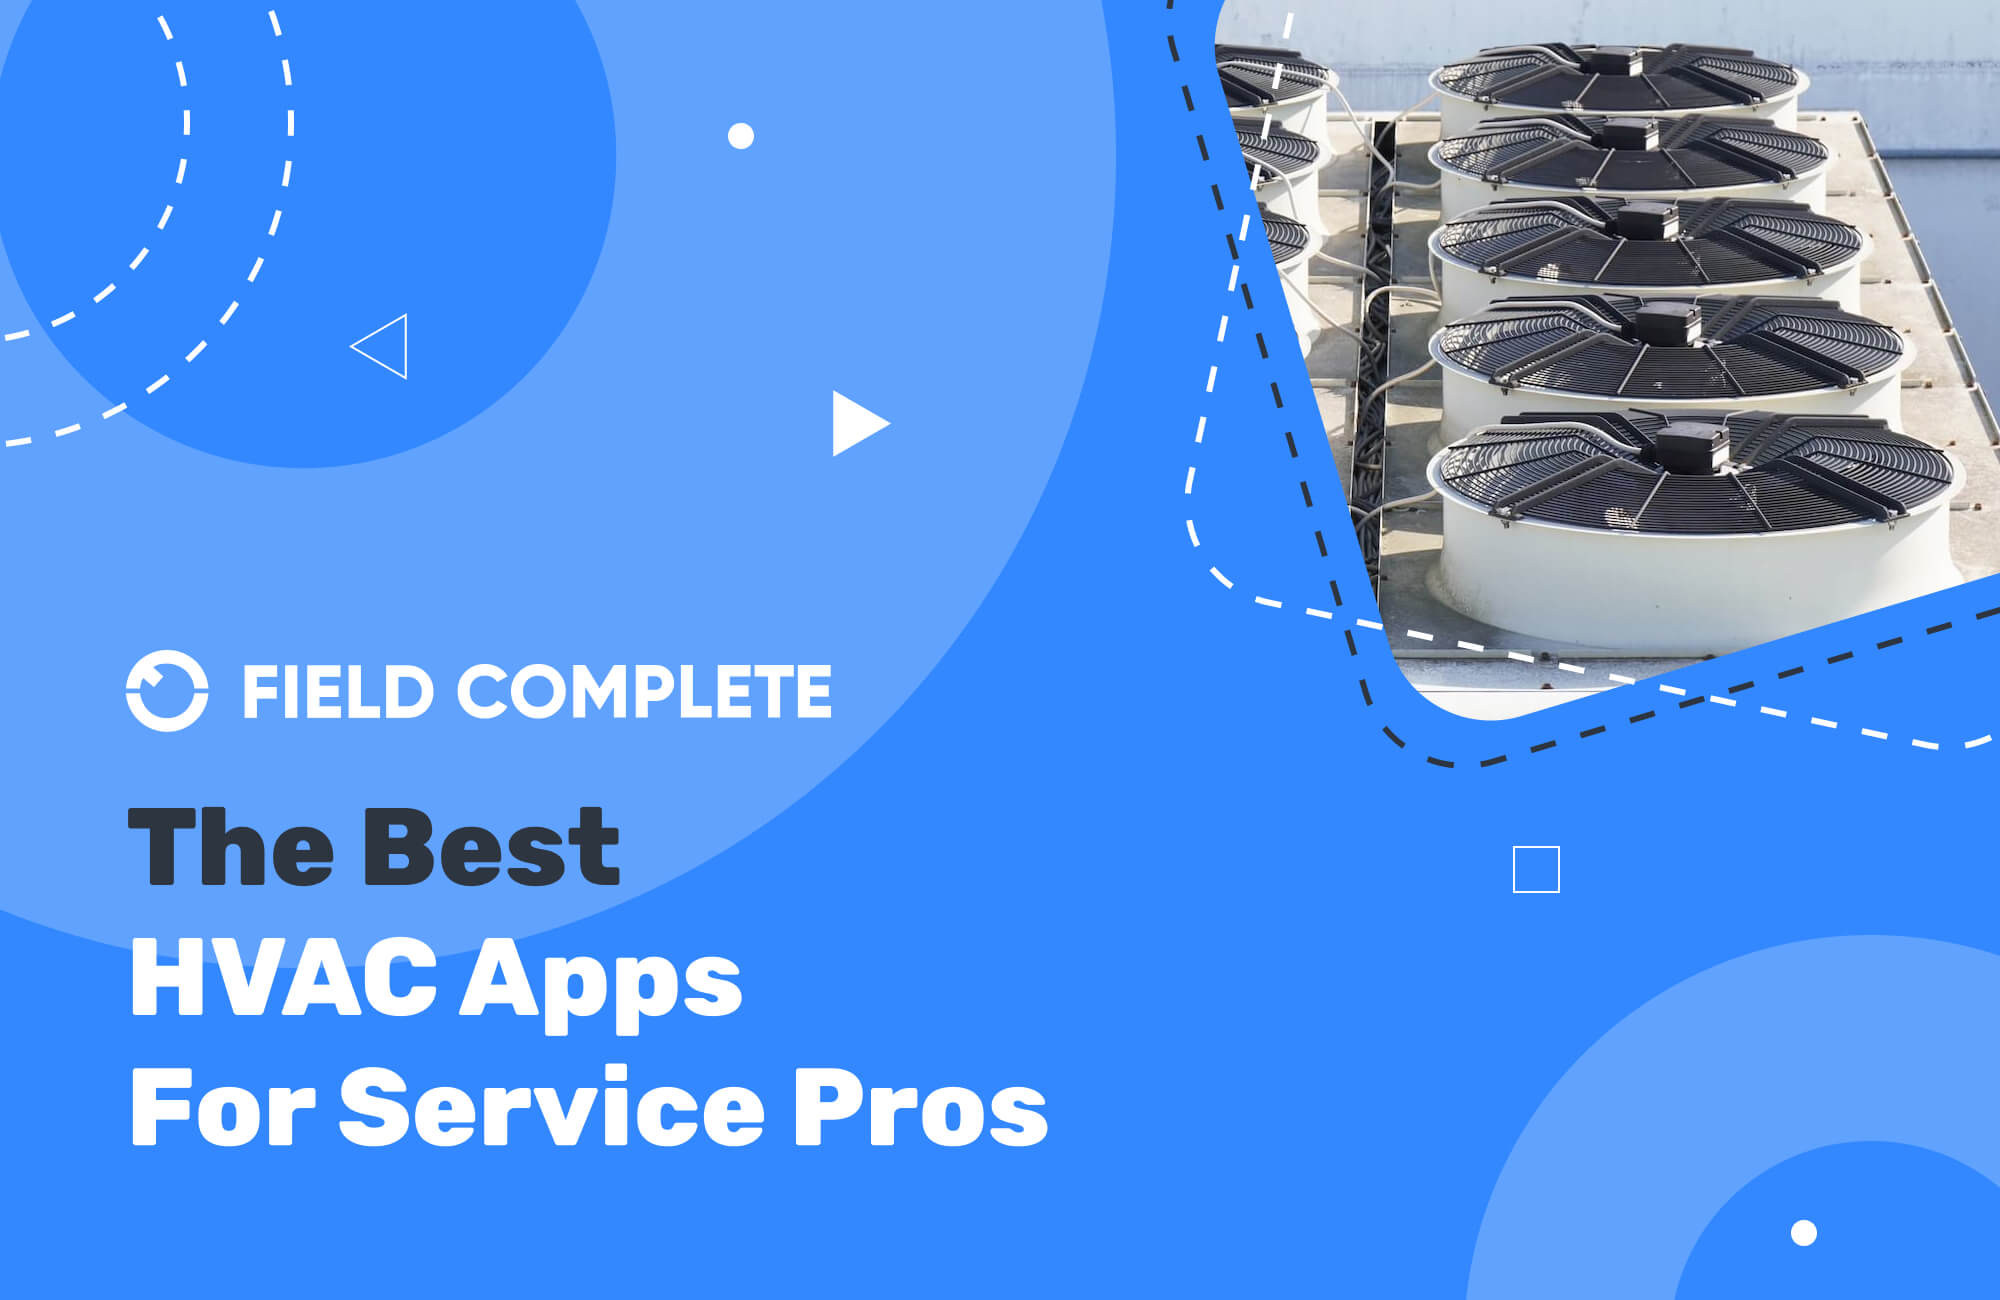 The best HVAC apps for Service Pros